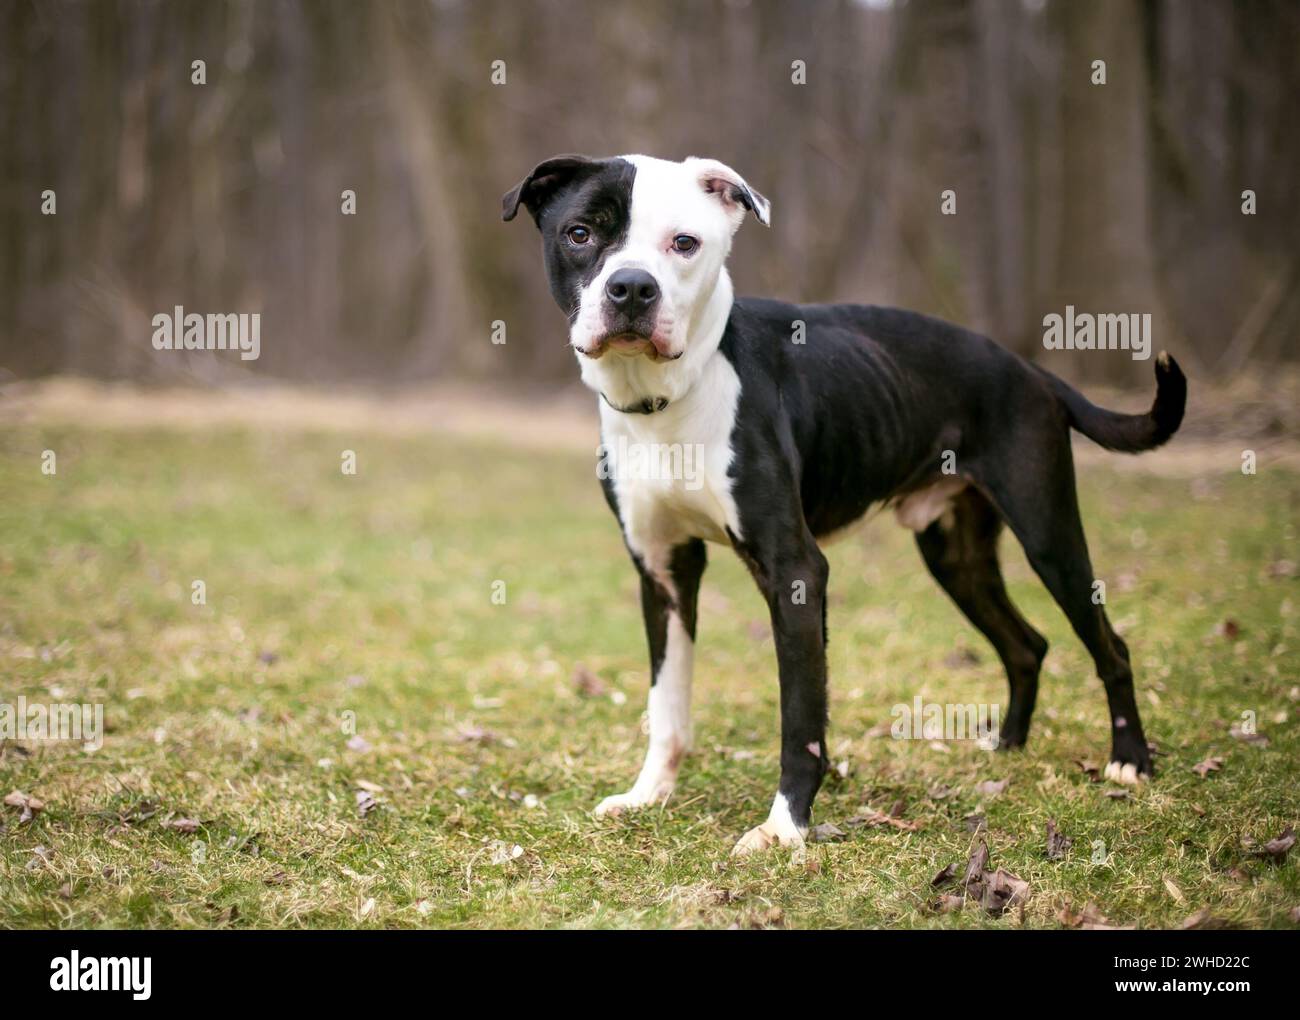 A malnourished American Bulldog x Pit Bull Terrier mixed breed dog standing outdoors Stock Photo